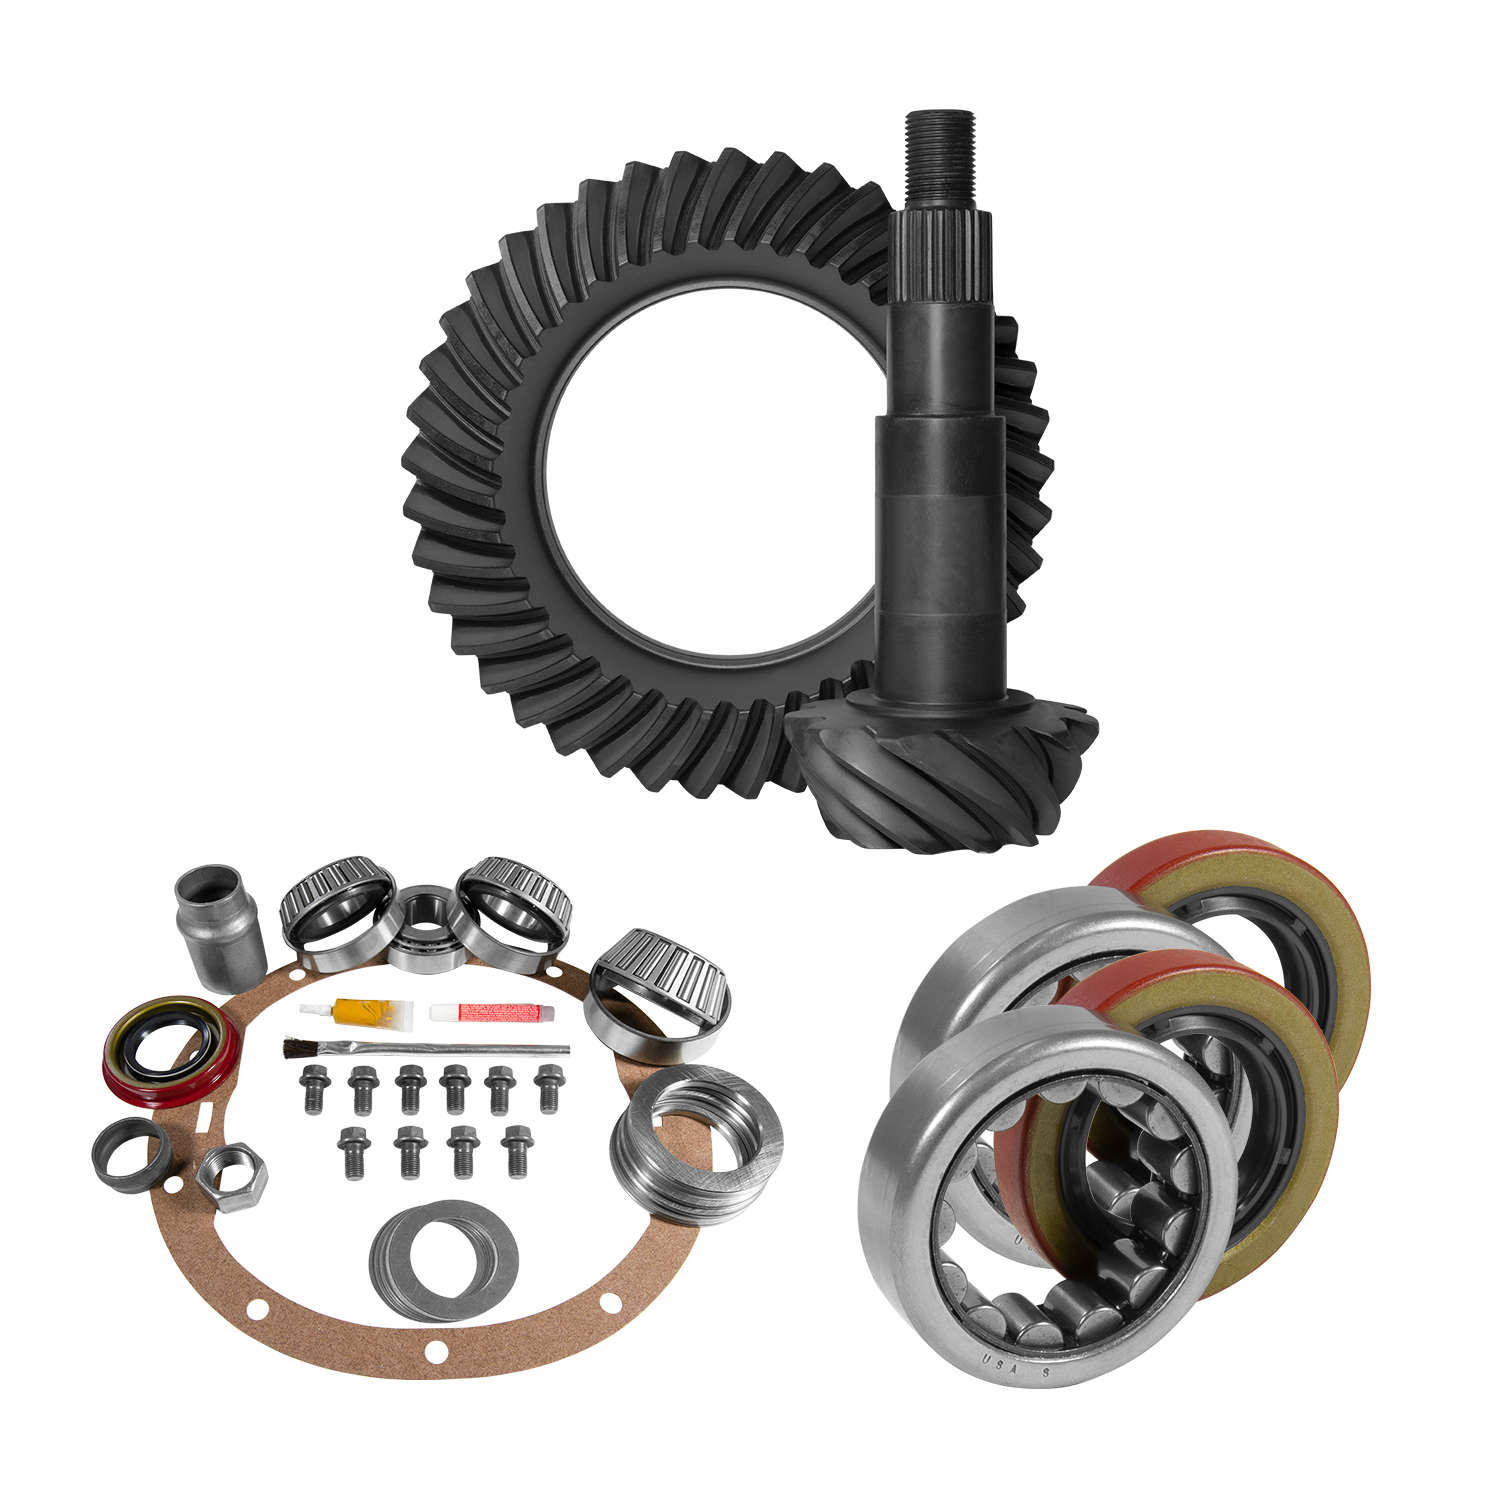 GM 8.2 Chevy 10-Bolt Ring & Pinion Gears 3.55 Ratio 